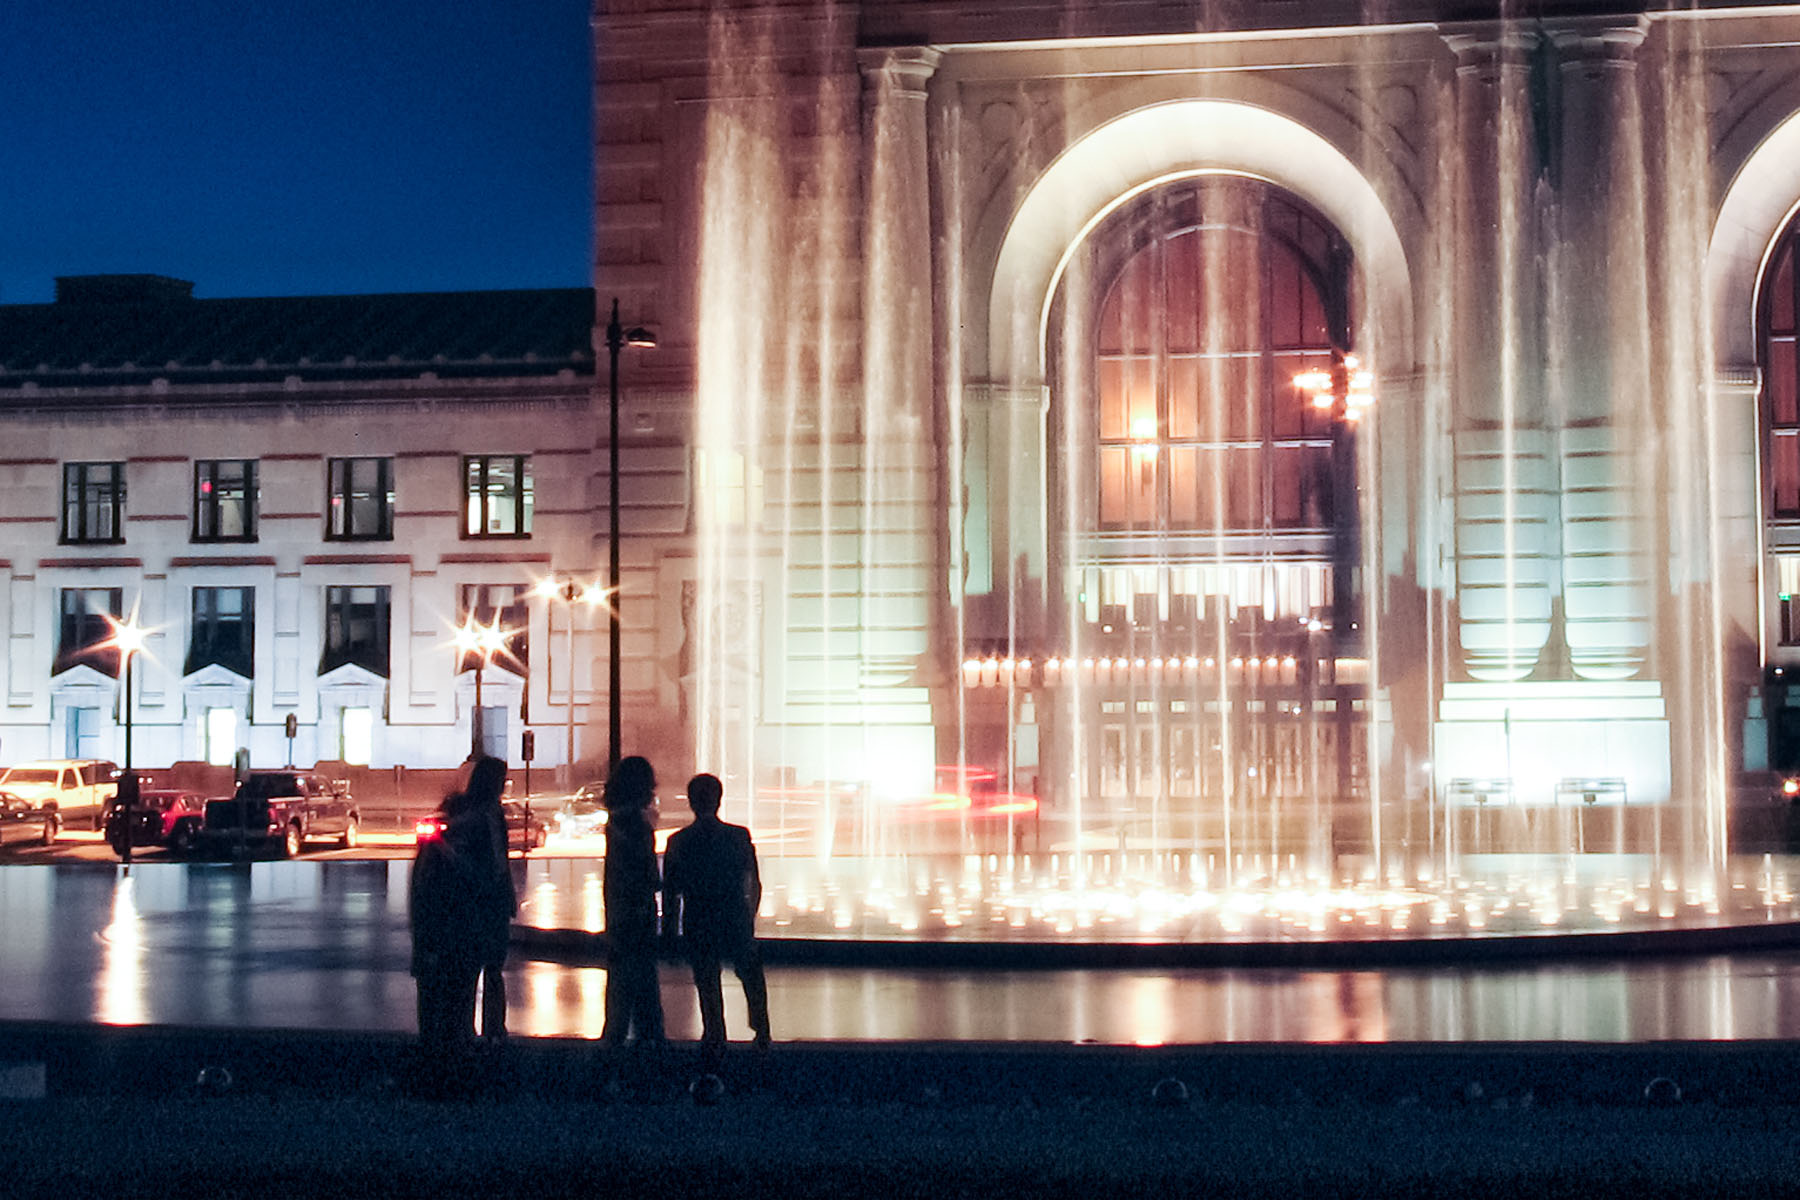 A group watches the fountain in front of Union Station, Kansas City, while waiting for a photographer (not me) to set up a shot.  Click for next photo.